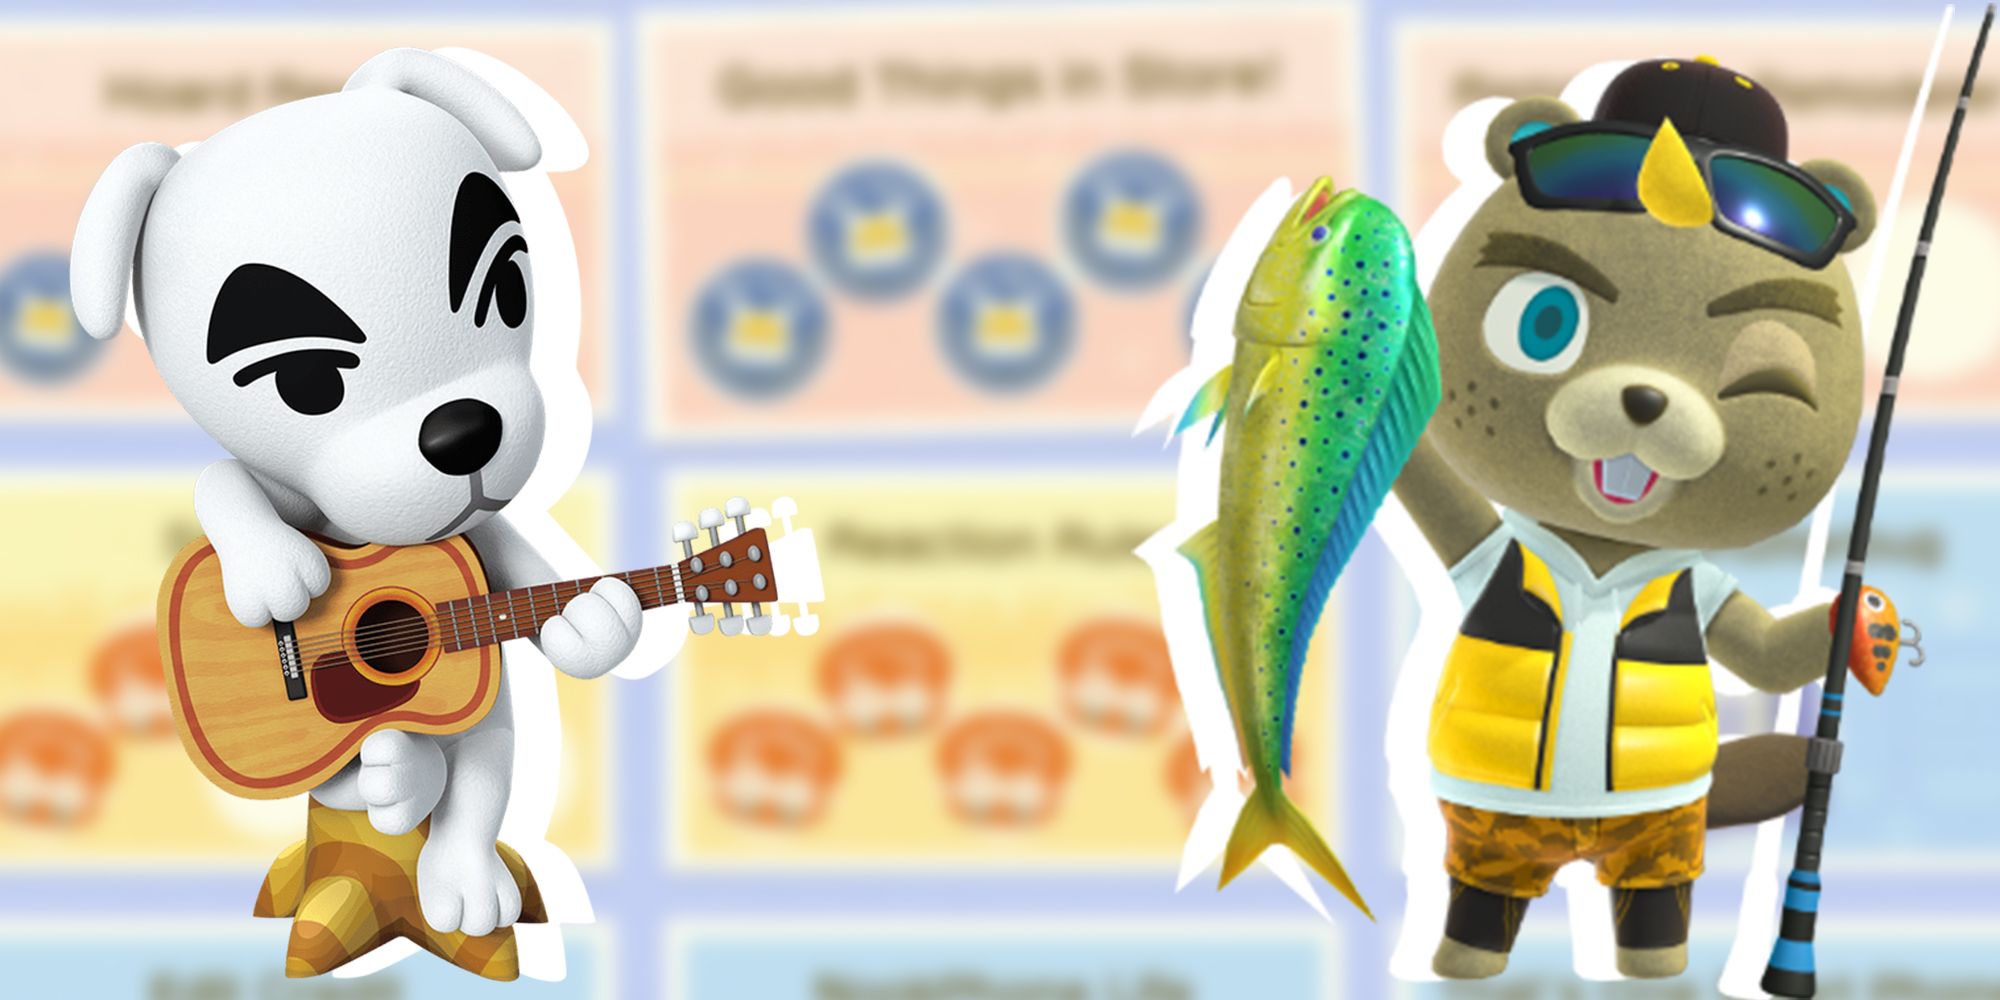 Animal Crossing: New Horizon's K.K. Slider and CJ posing over a blurred Nook Miles background